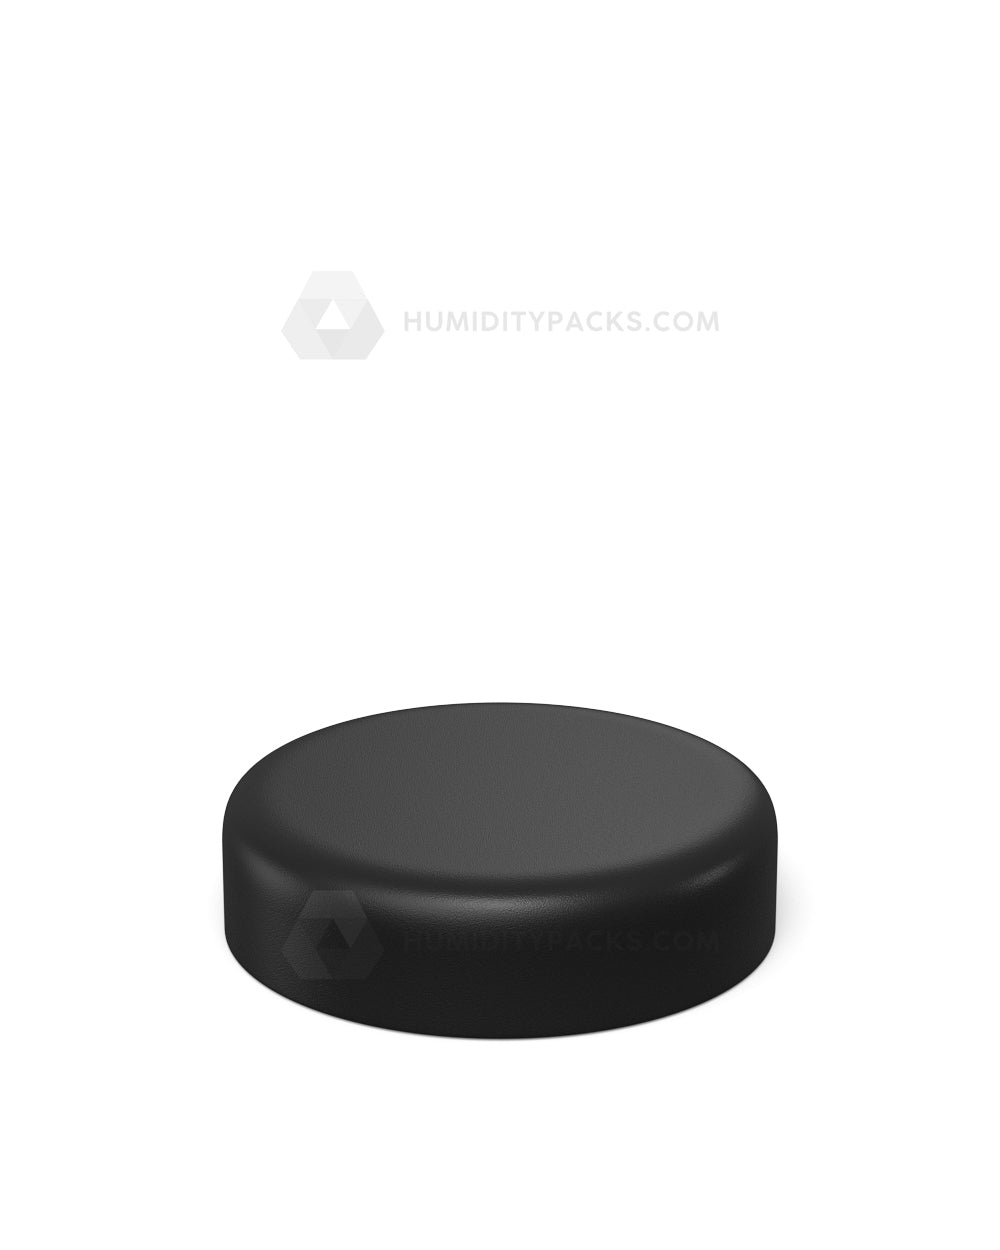 53mm Push and Turn Dome Child Resistant Plastic Caps With Foam Liner - Matte Black - 100/Box